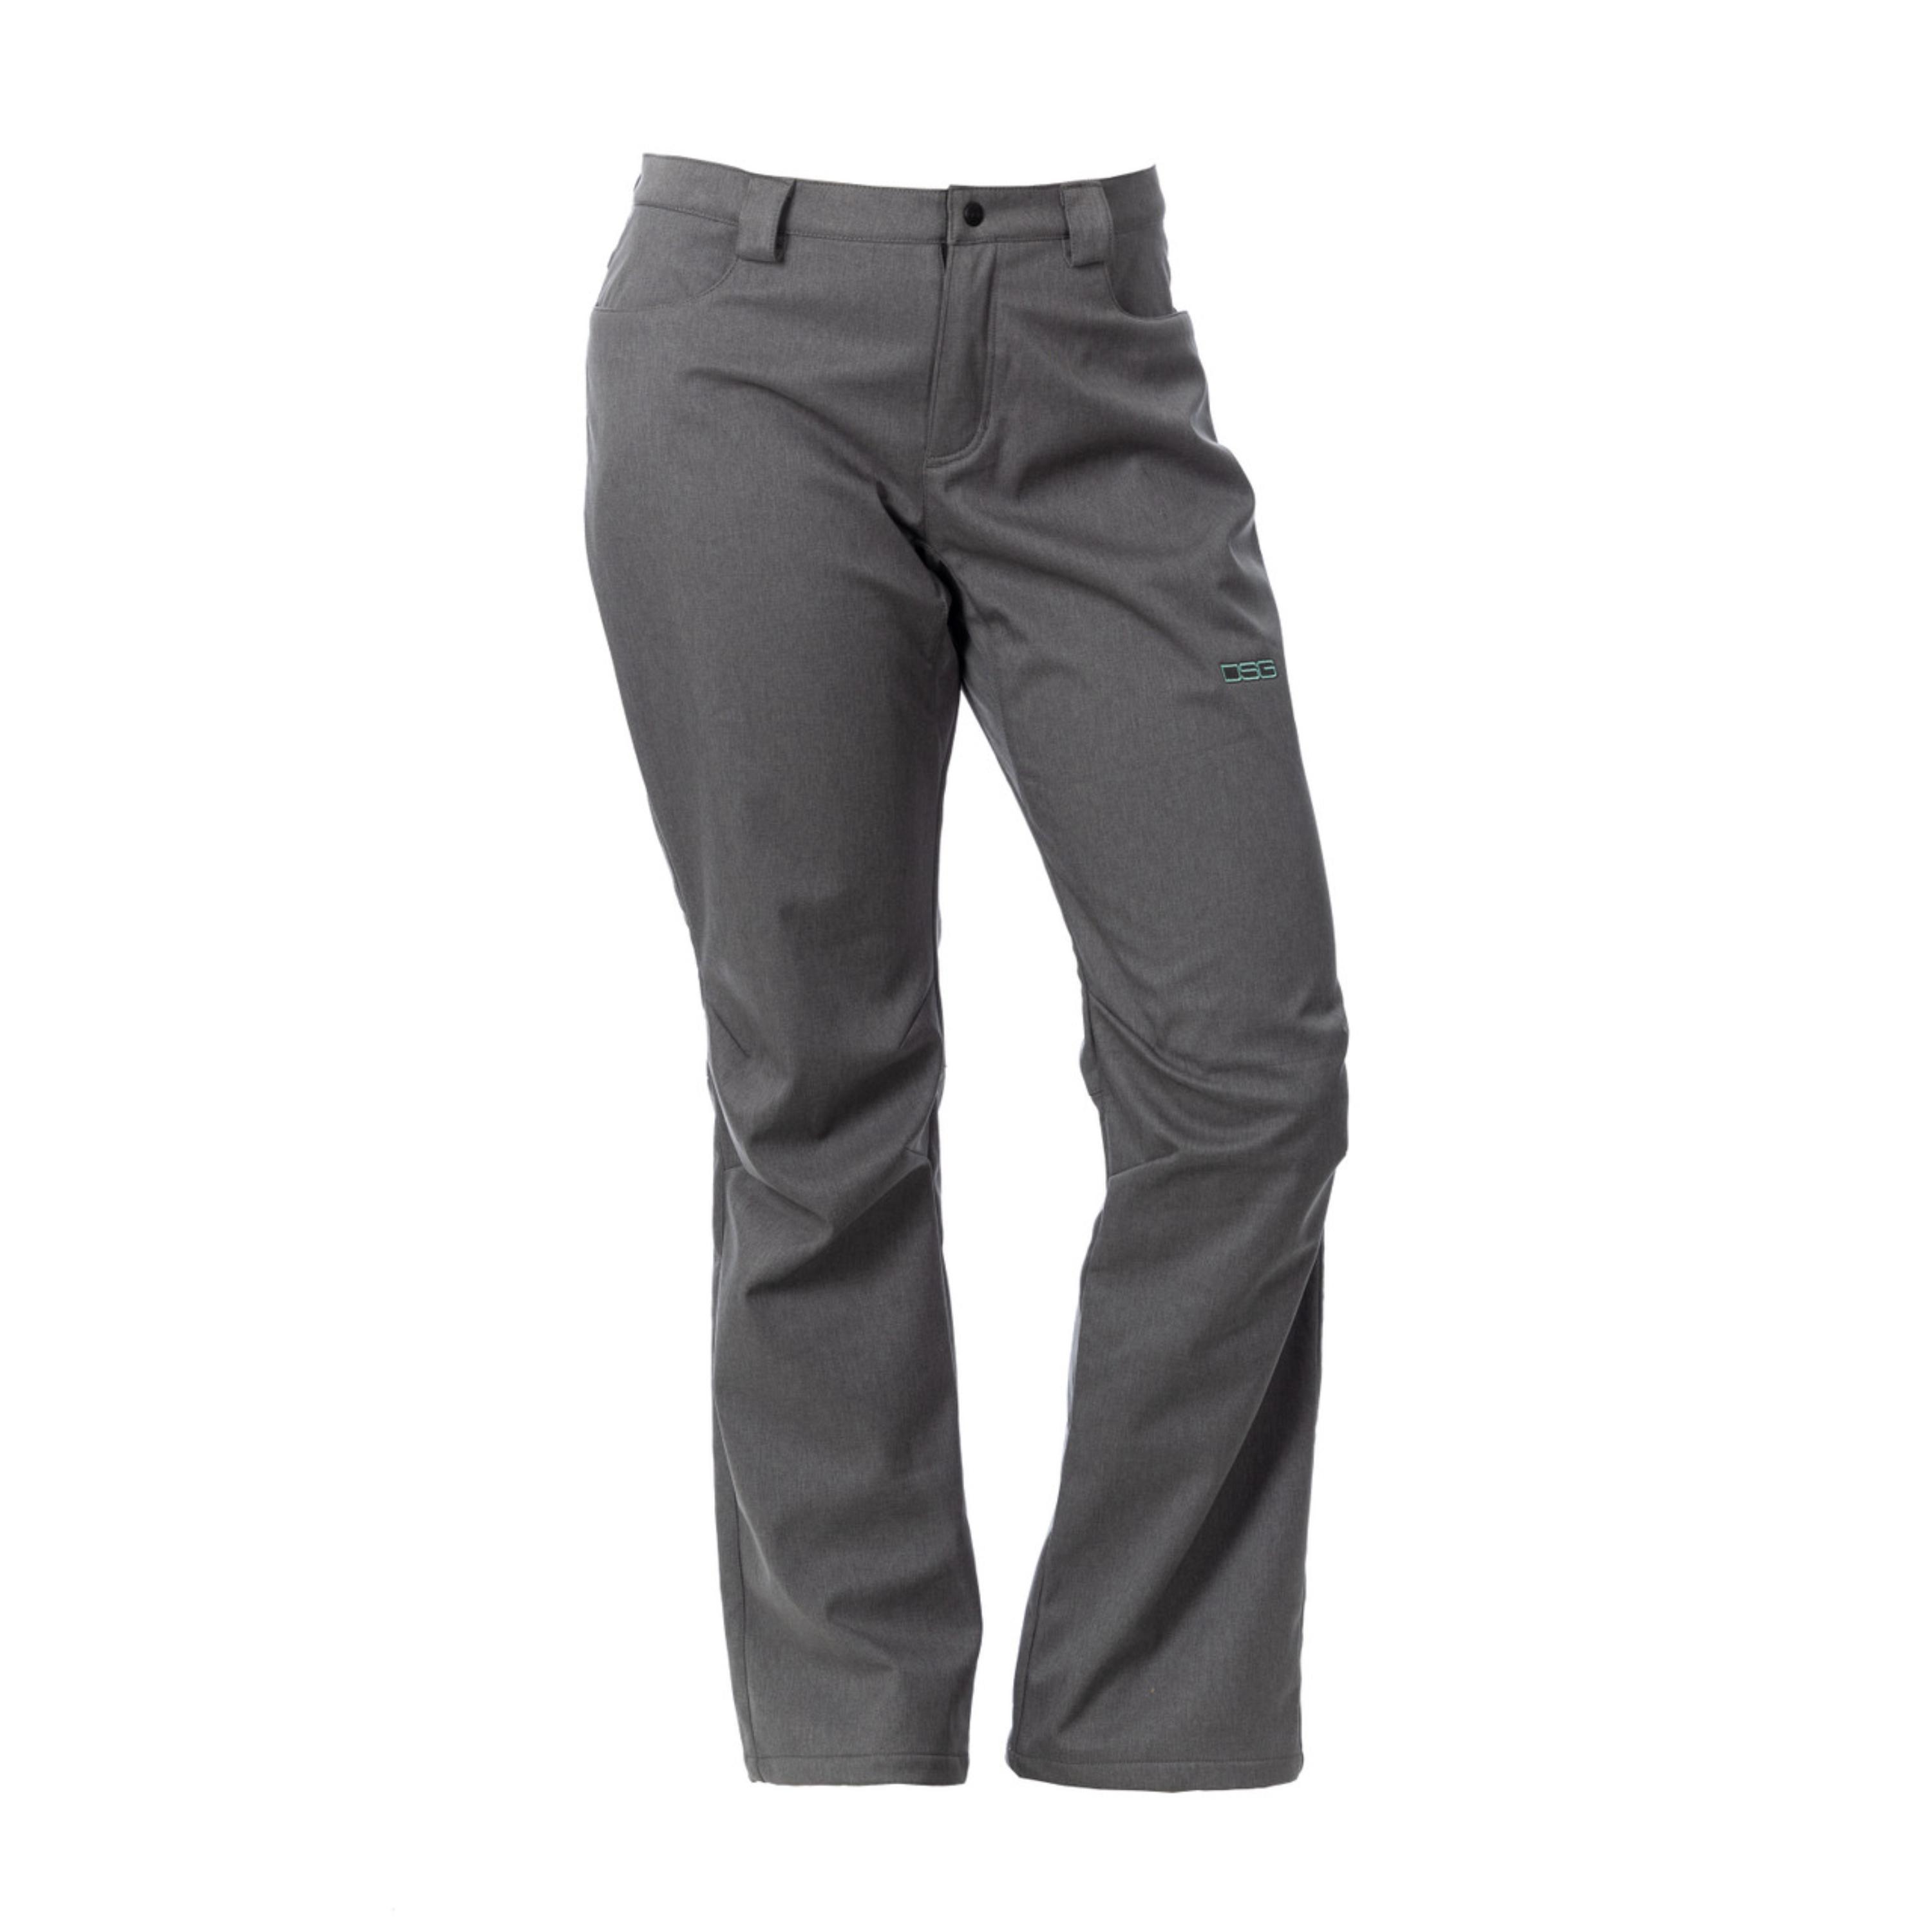 DSG Outerwear Women's D-Tech Base Layer Pants - 728977, Women's Hunting  Clothing at Sportsman's Guide